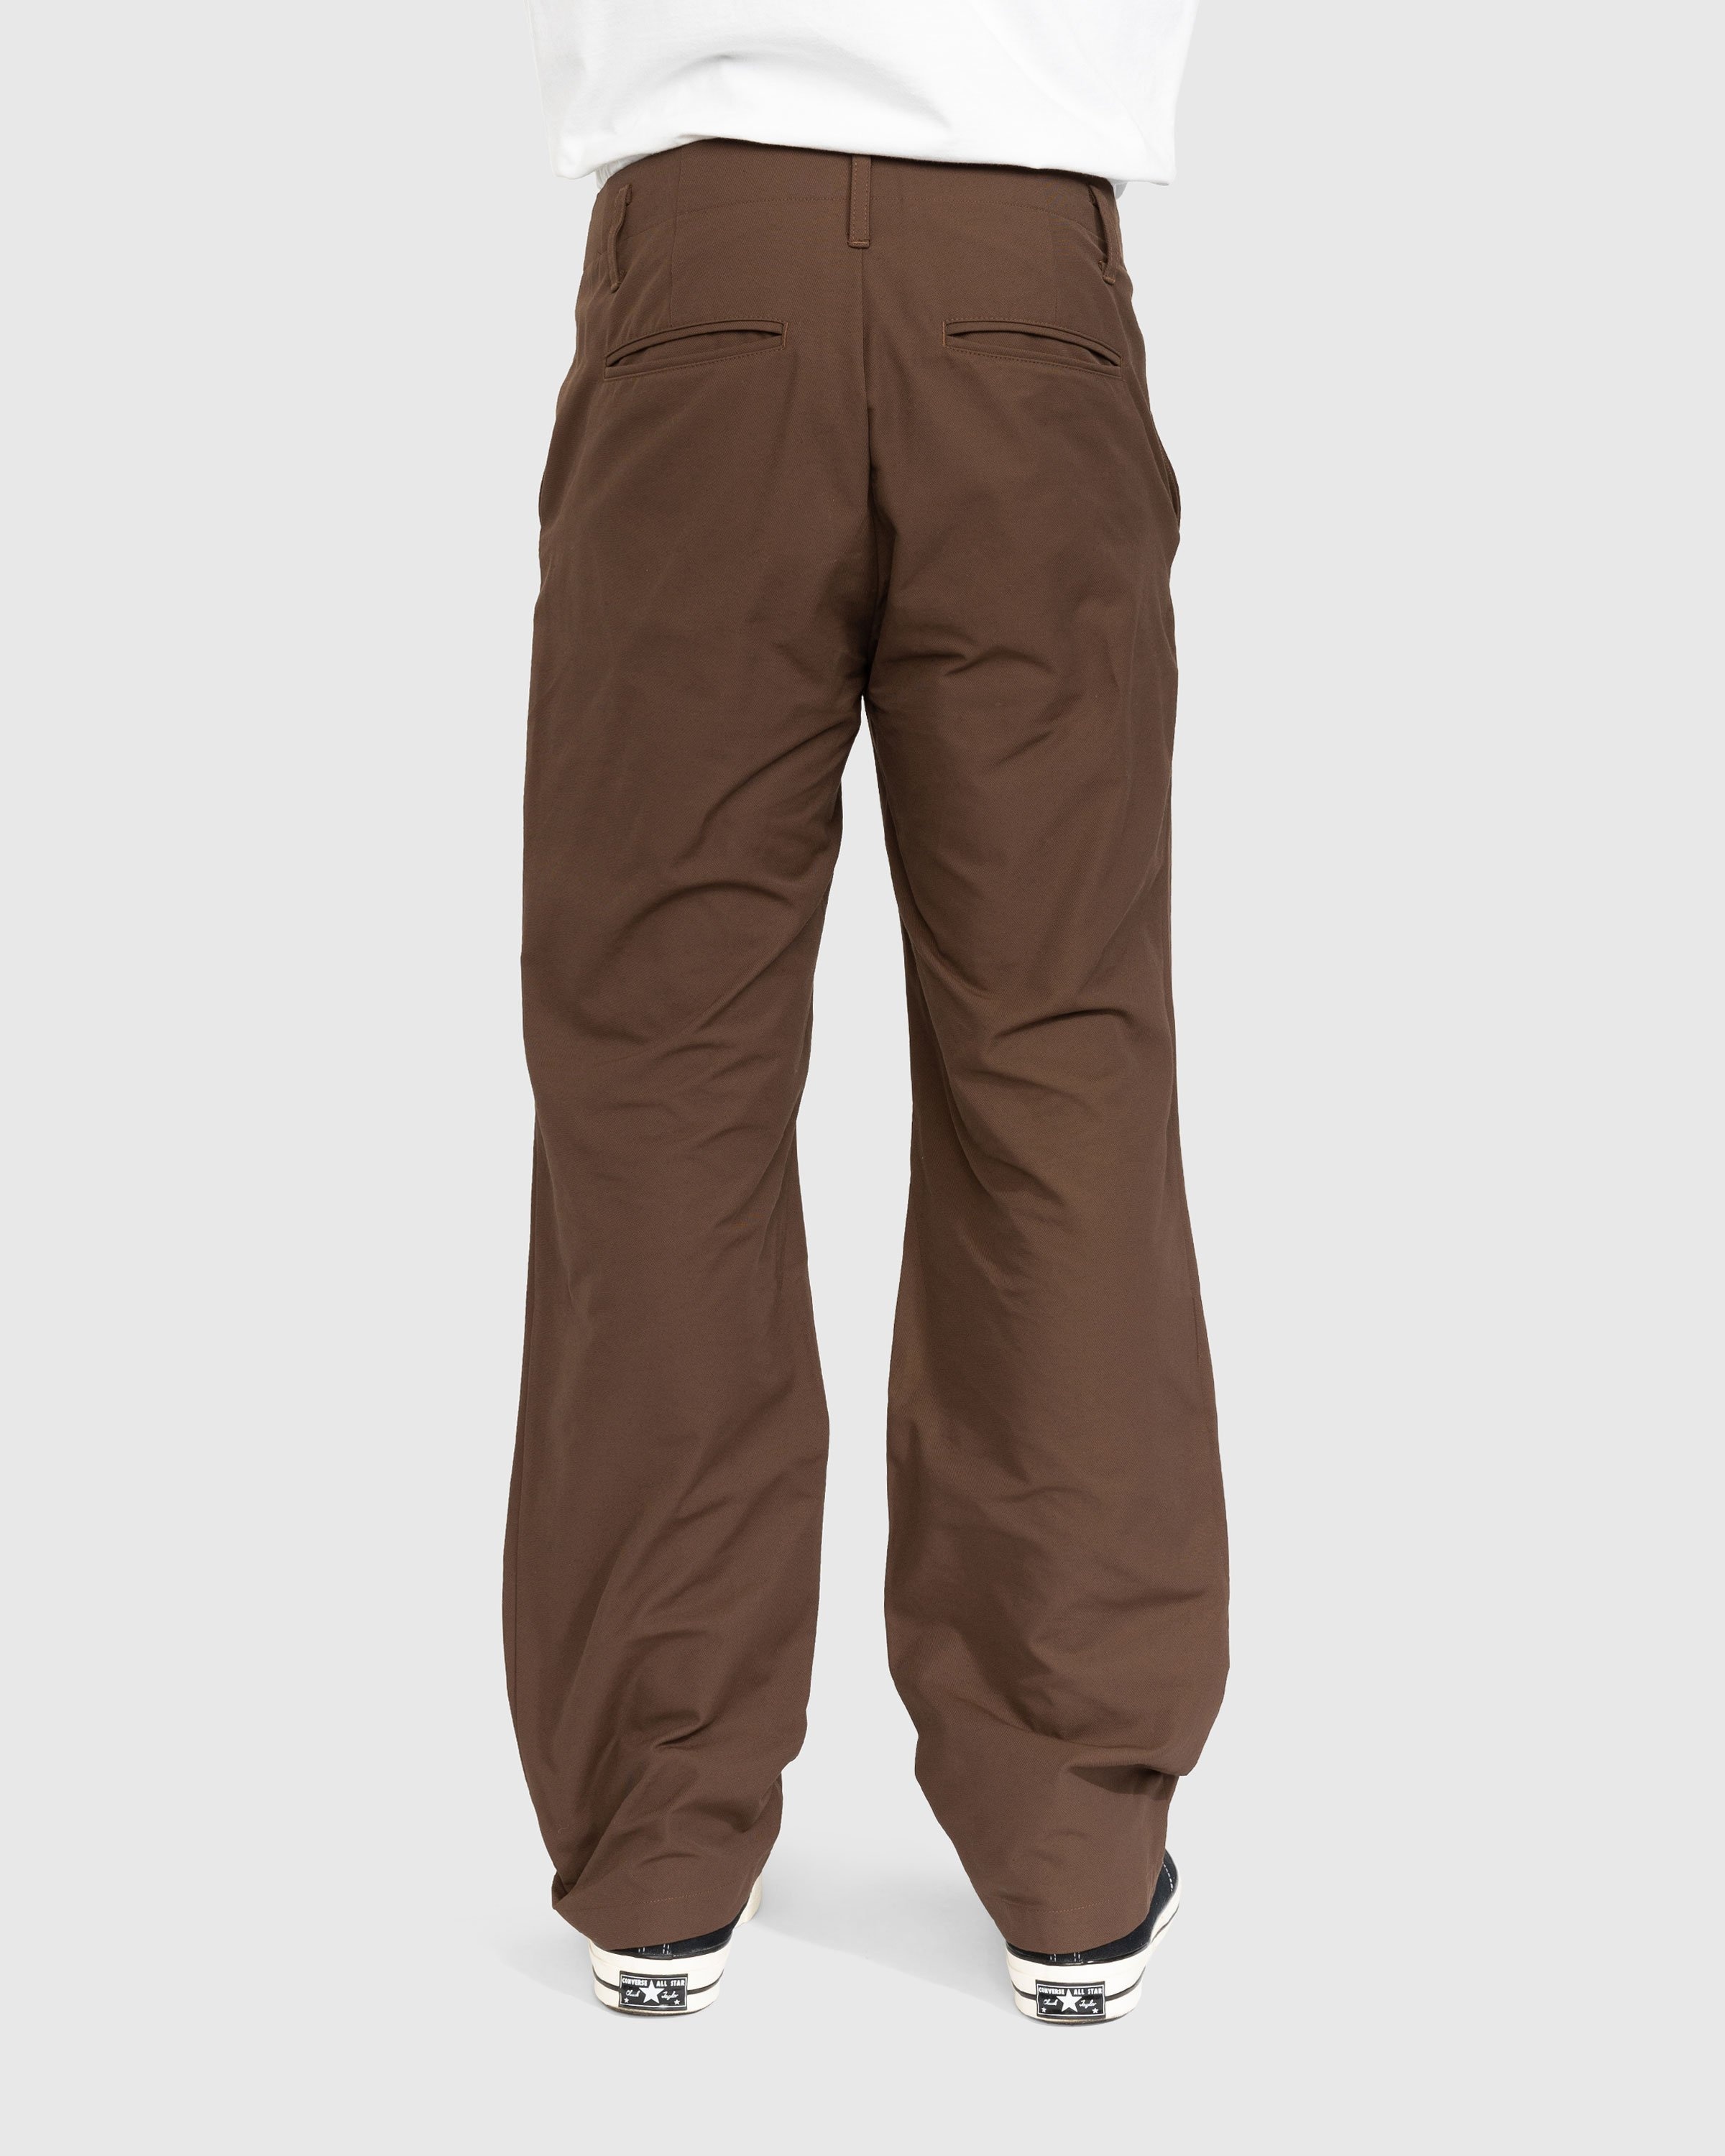 Post Archive Faction (PAF) – 5.0 Technical Trousers Right Brown - Active Pants - Brown - Image 4